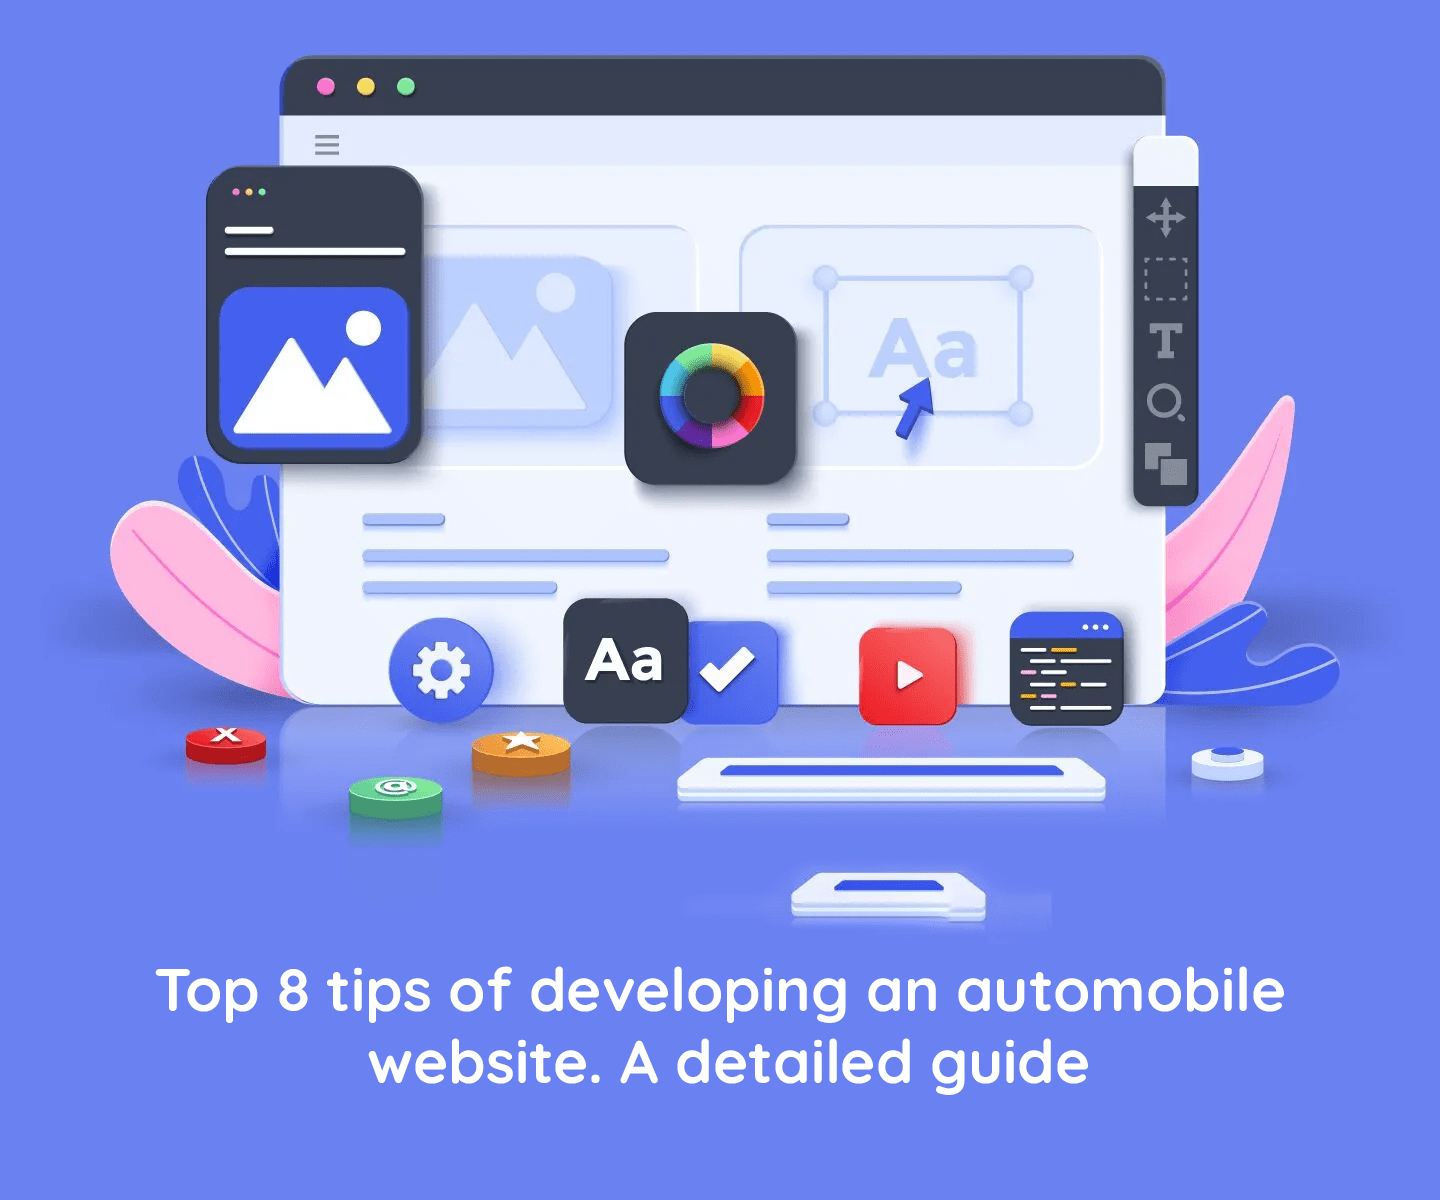 Top 8 tips of developing an automobile website. A detailed guide